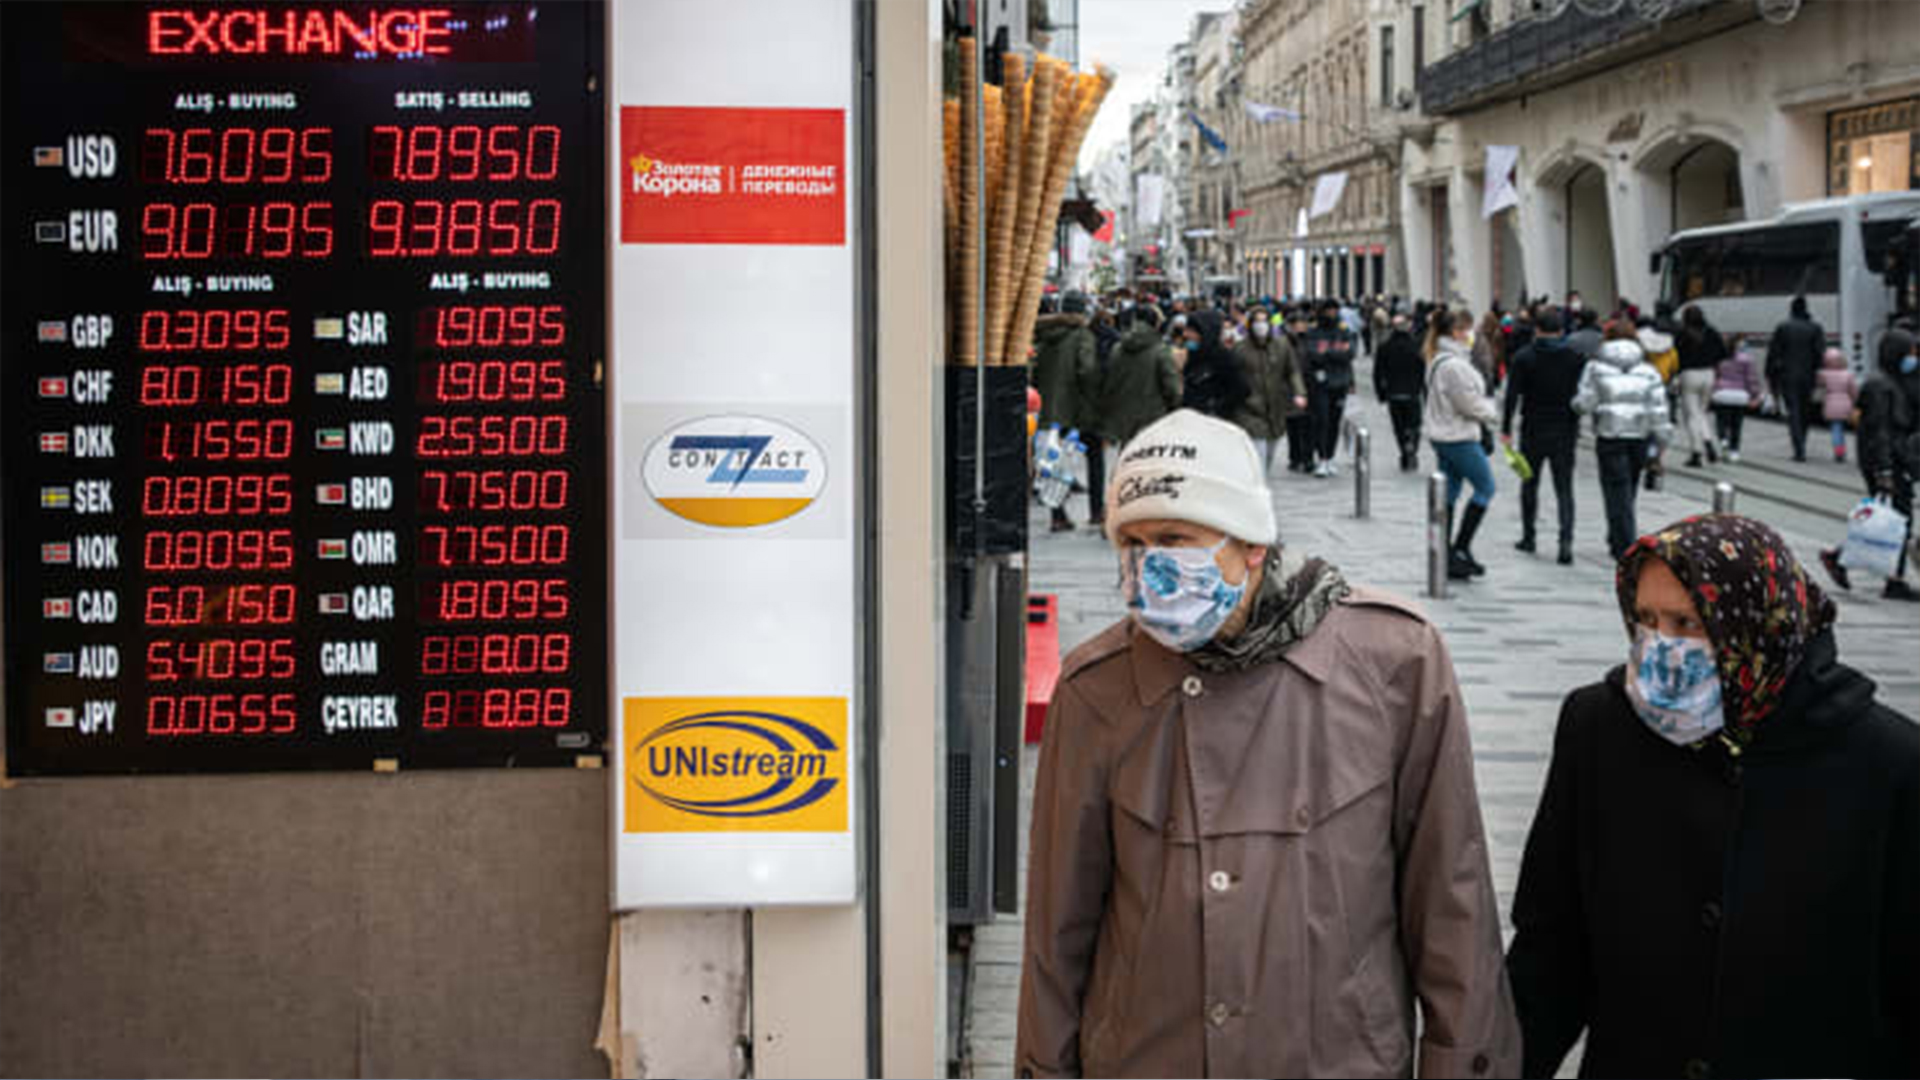  Pedestrians pass exchange office’s showing weakened rates for the lira on Istanbul’s Istiklal street, Turkey on 24 March, 2021. Diego Cupolo | NurPhoto | Getty Images